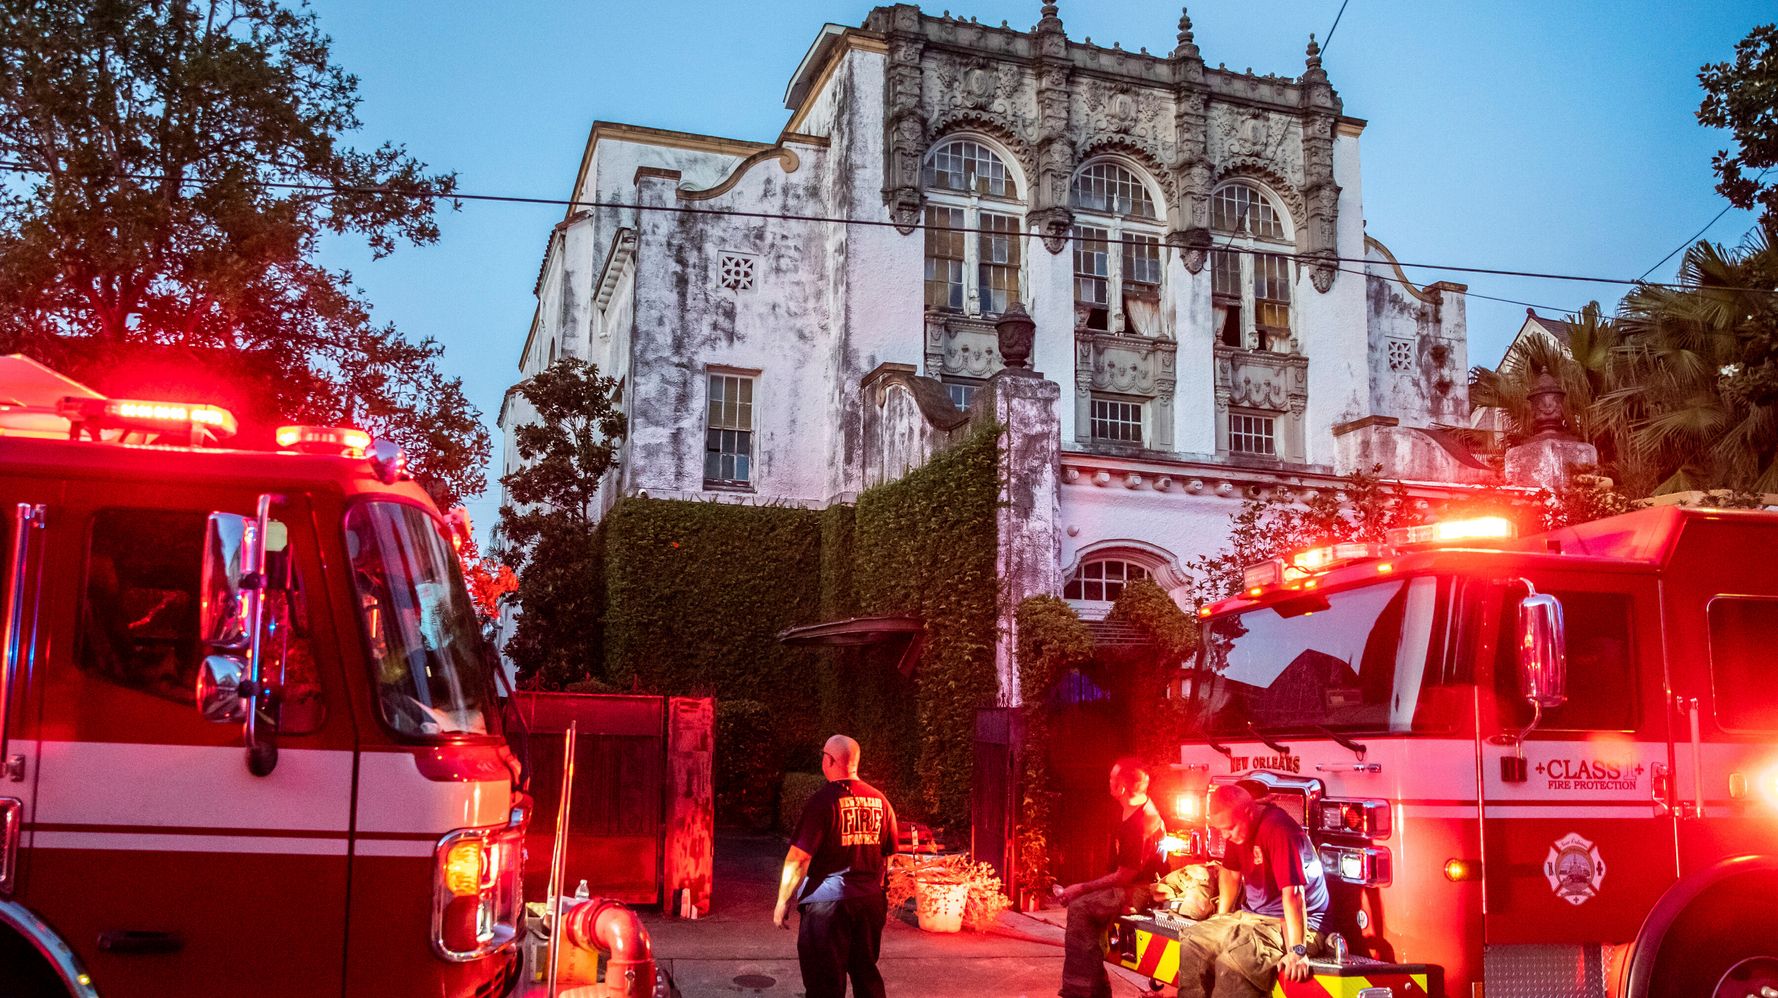 Police Launch Arson Probe Into Fire At Beyonce's New Orleans Mansion